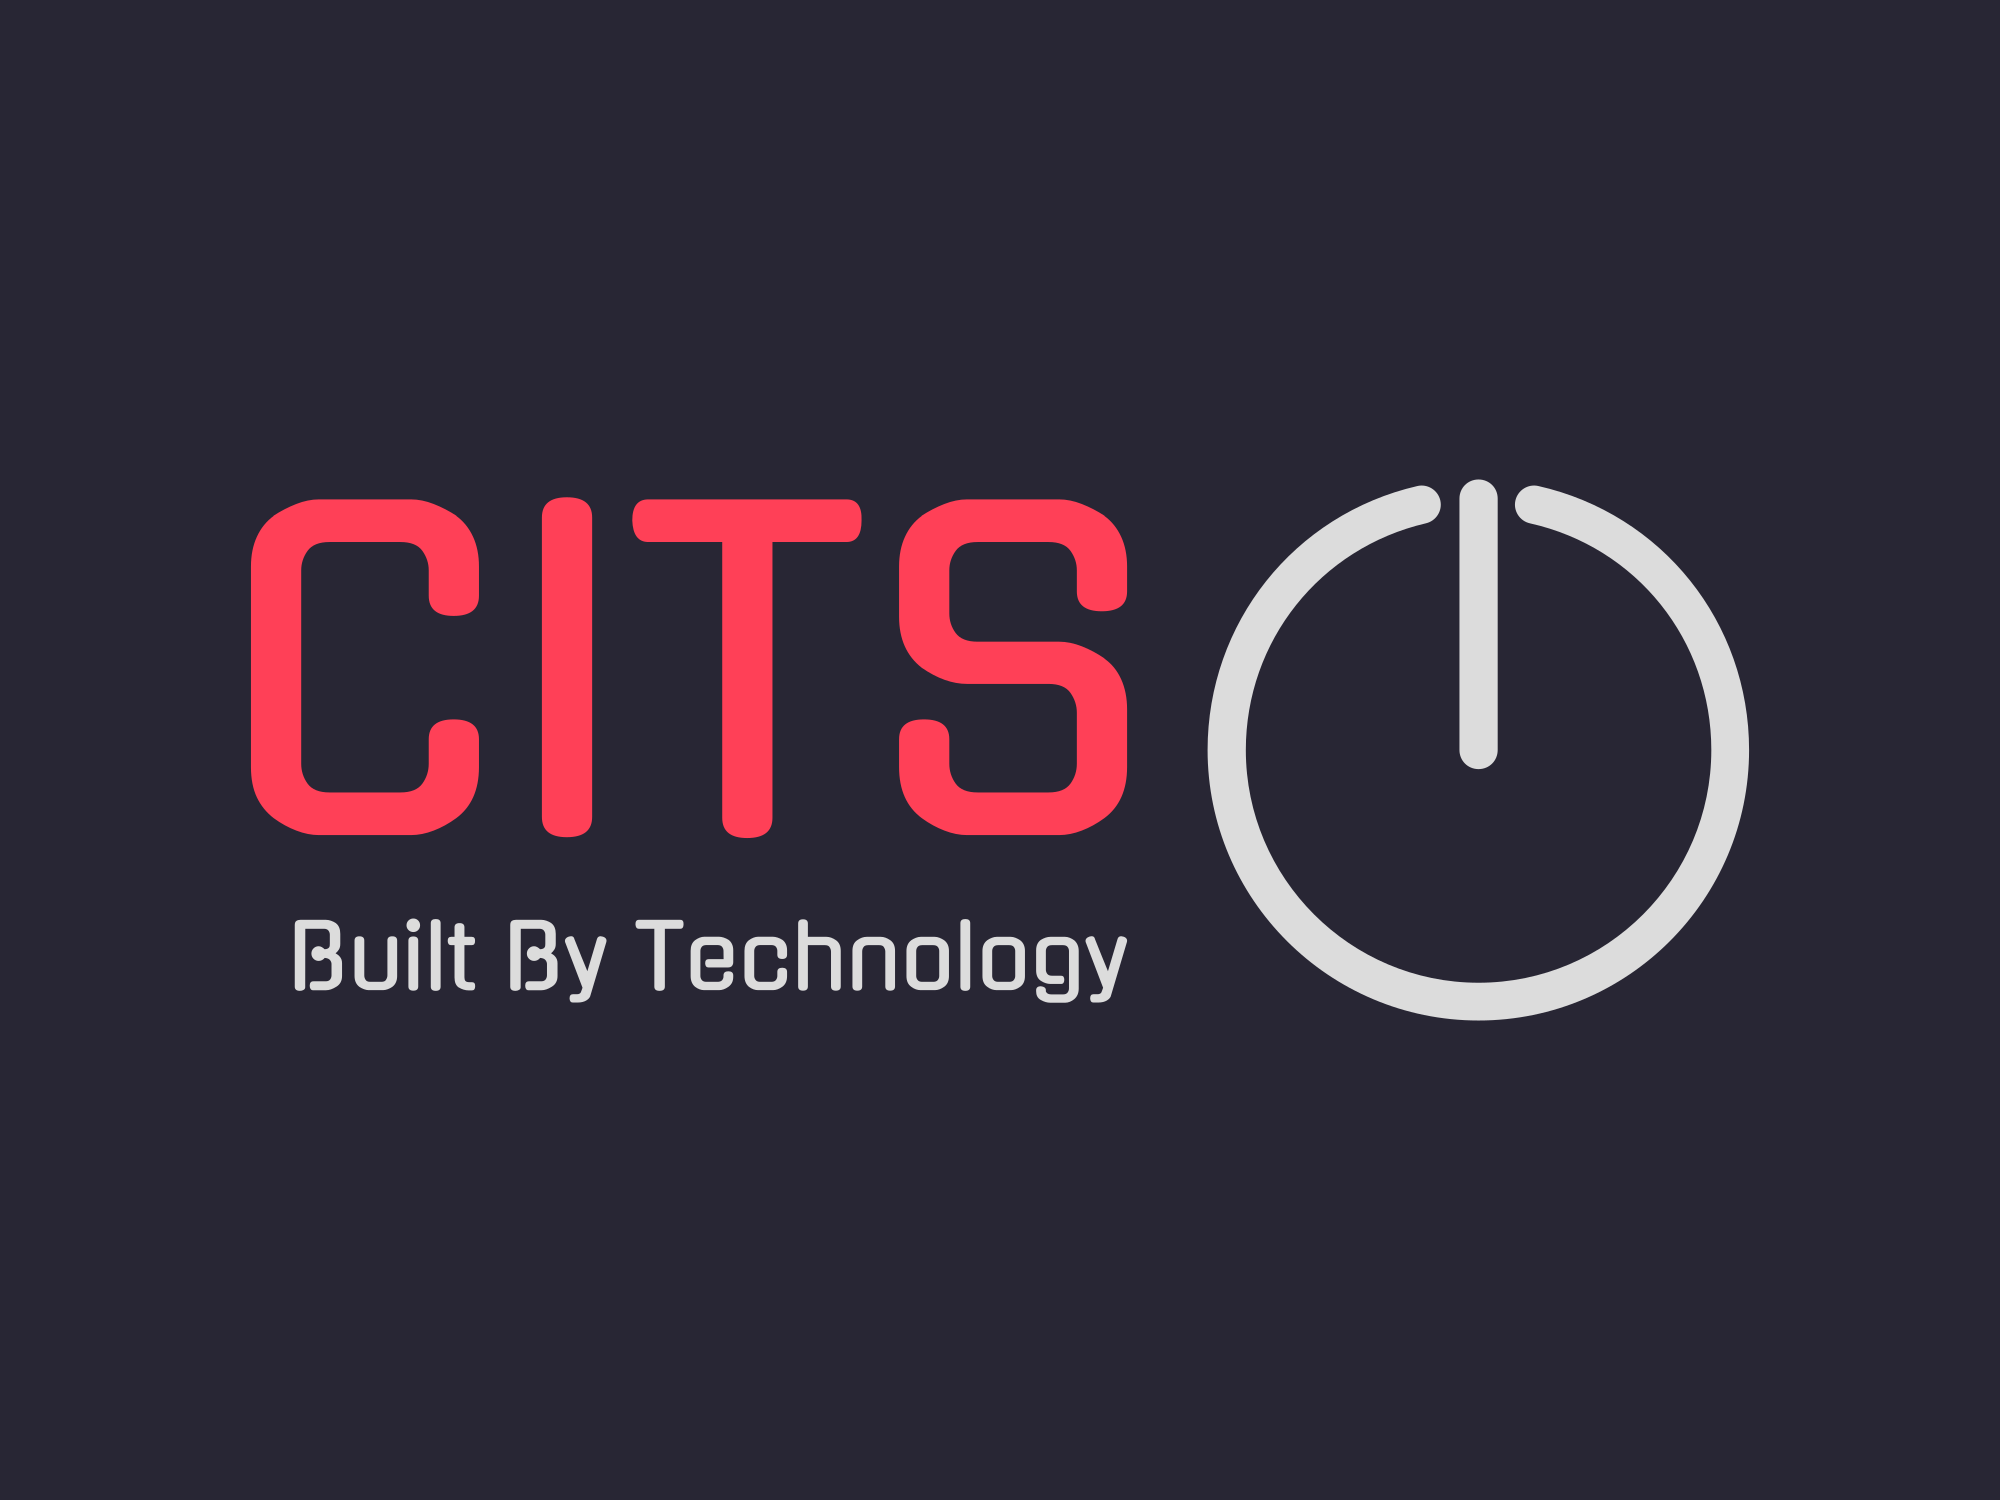 CITS - Built By Technology